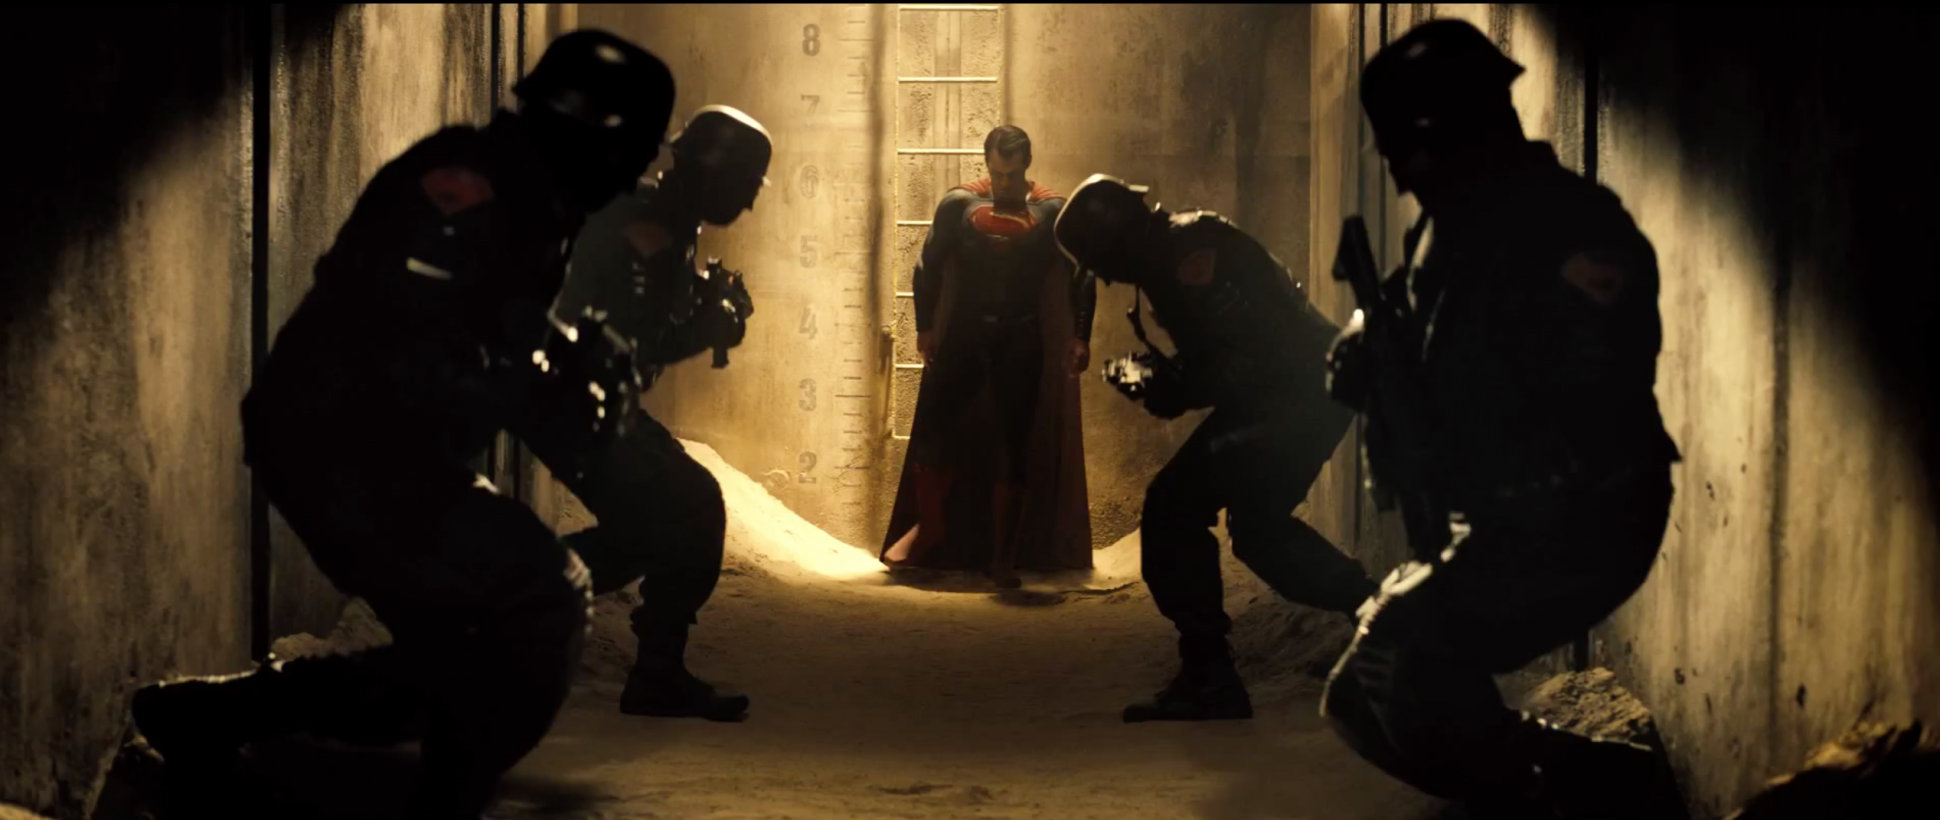 Superman and soldiers